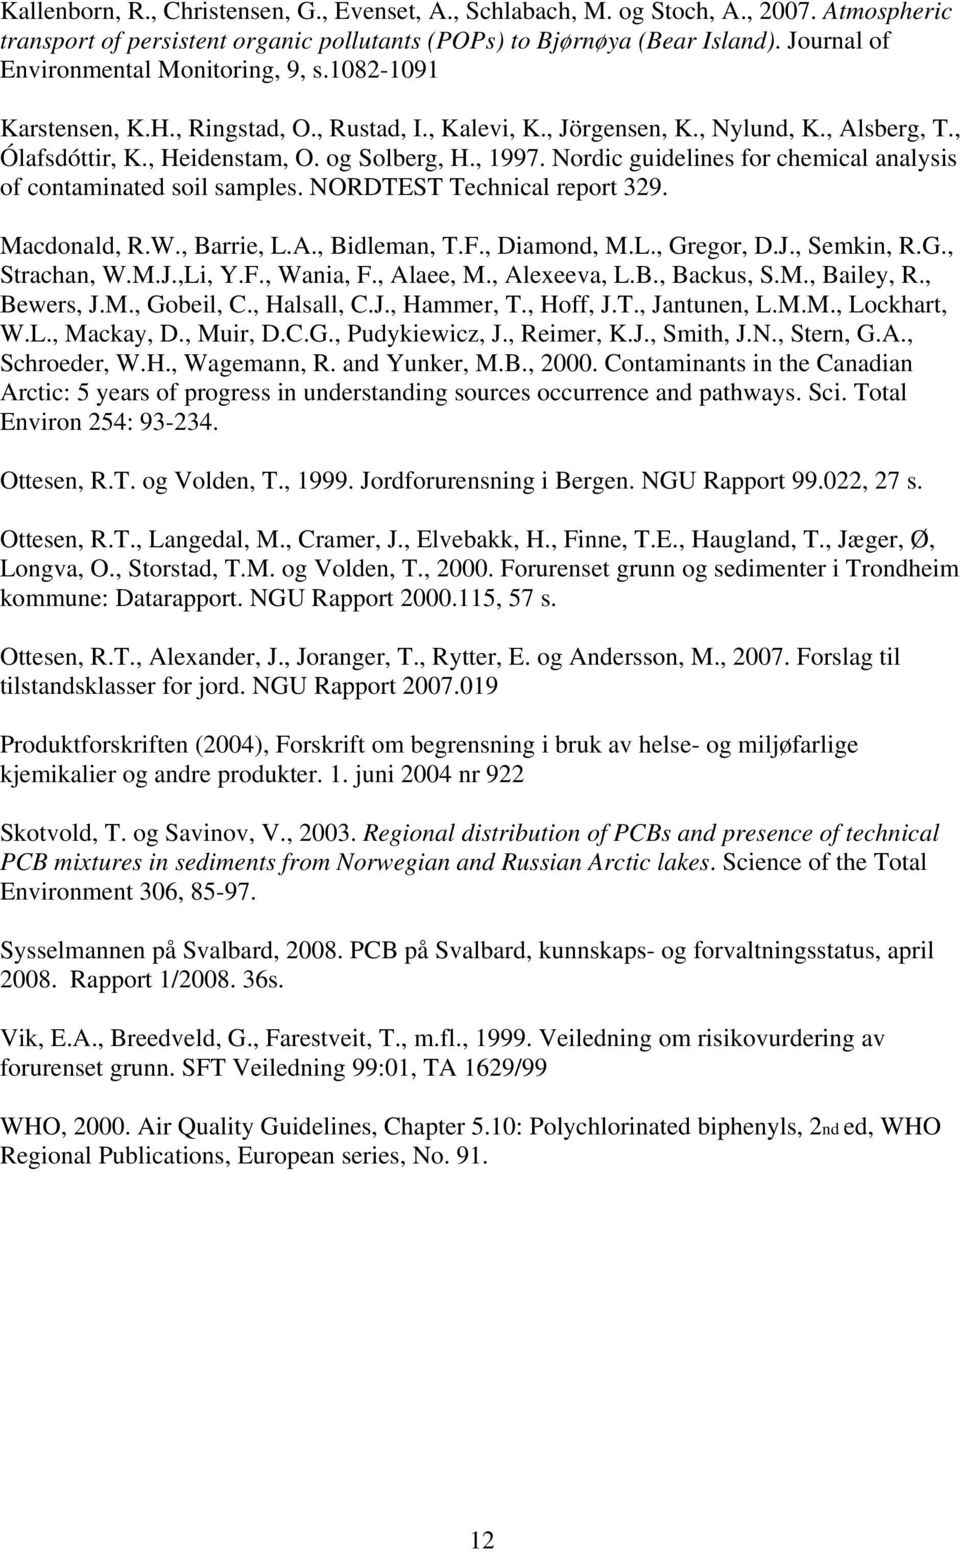 , 1997. Nordic guidelines for chemical analysis of contaminated soil samples. NORDTEST Technical report 329. Macdonald, R.W., Barrie, L.A., Bidleman, T.F., Diamond, M.L., Gregor, D.J., Semkin, R.G., Strachan, W.